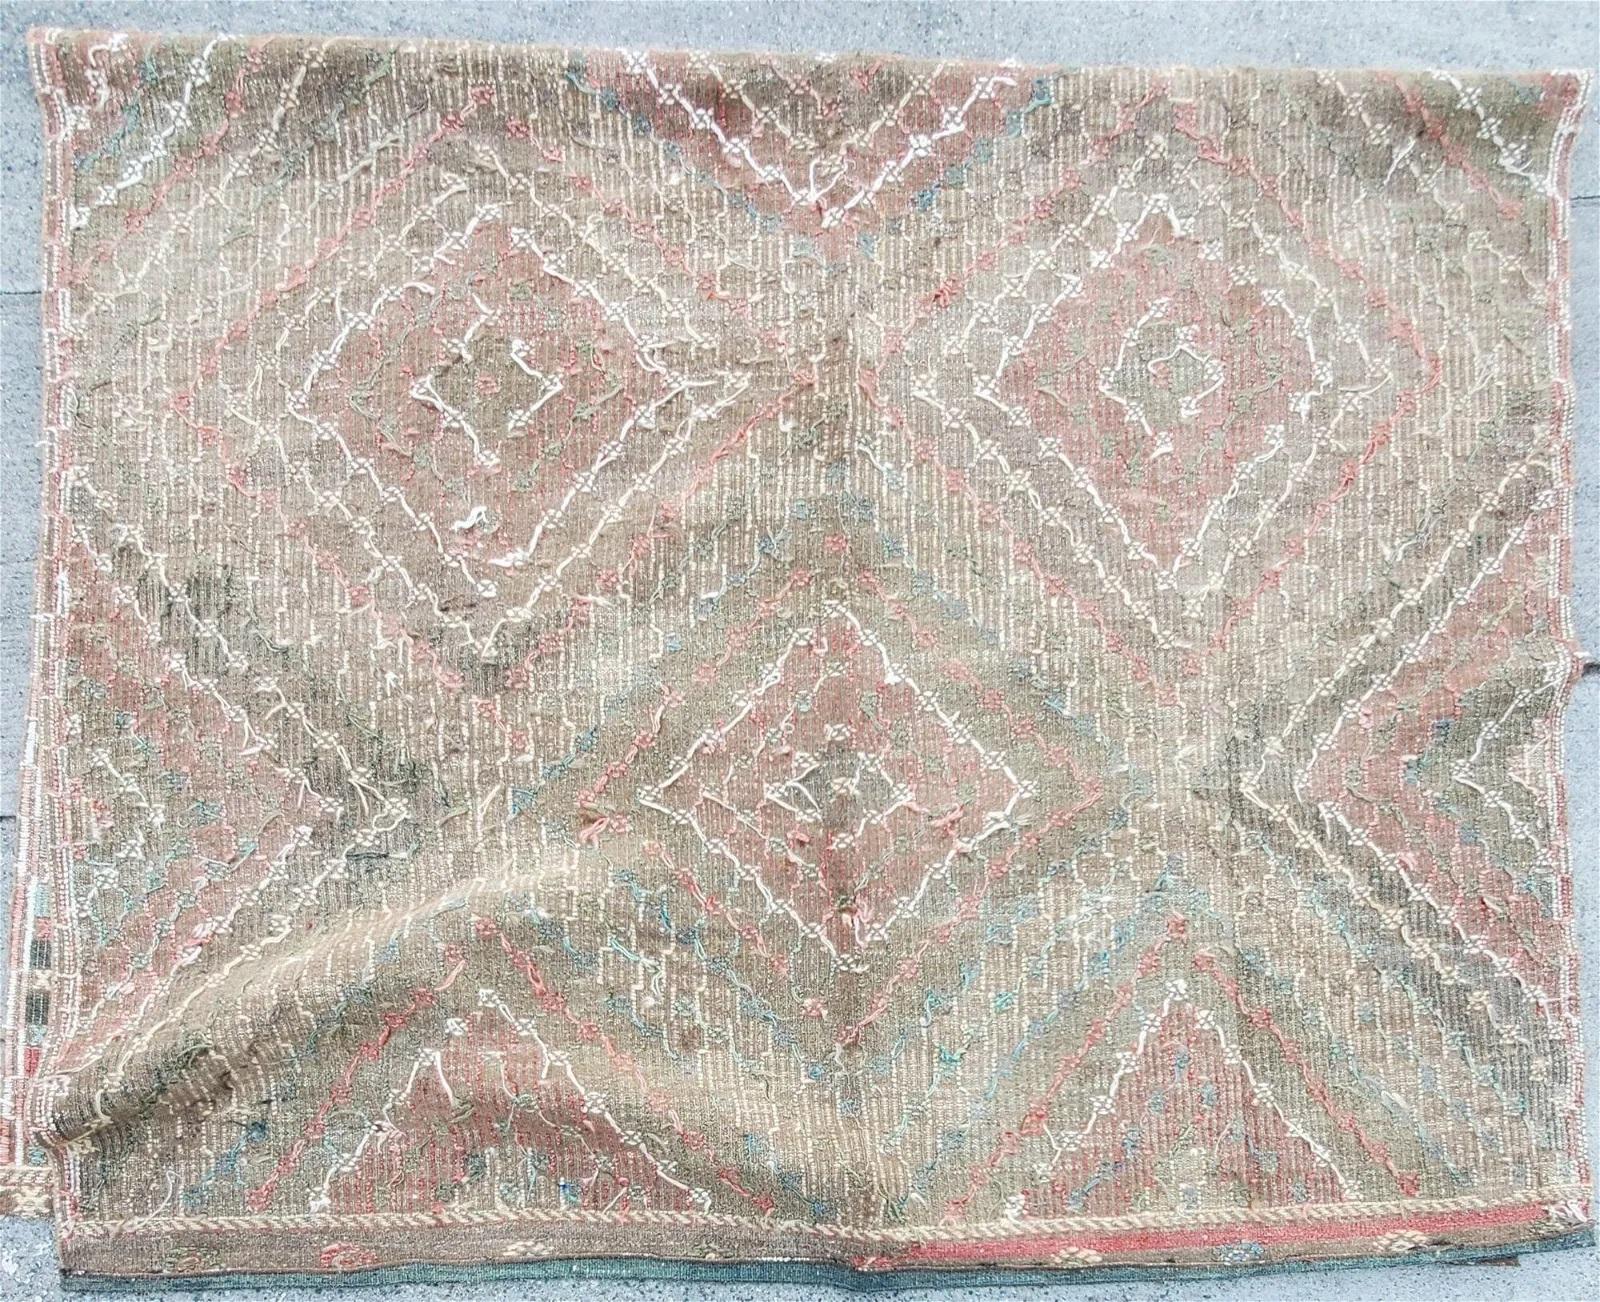 Jhin -Jhin Hand Knotted Turkish Rug. Hand made all wool hand dyed rug with plenty of color in a beautiful geometric design. Please see up clos images of knots and stitching. 

- Measures approximately 76 inches x 116 inches.